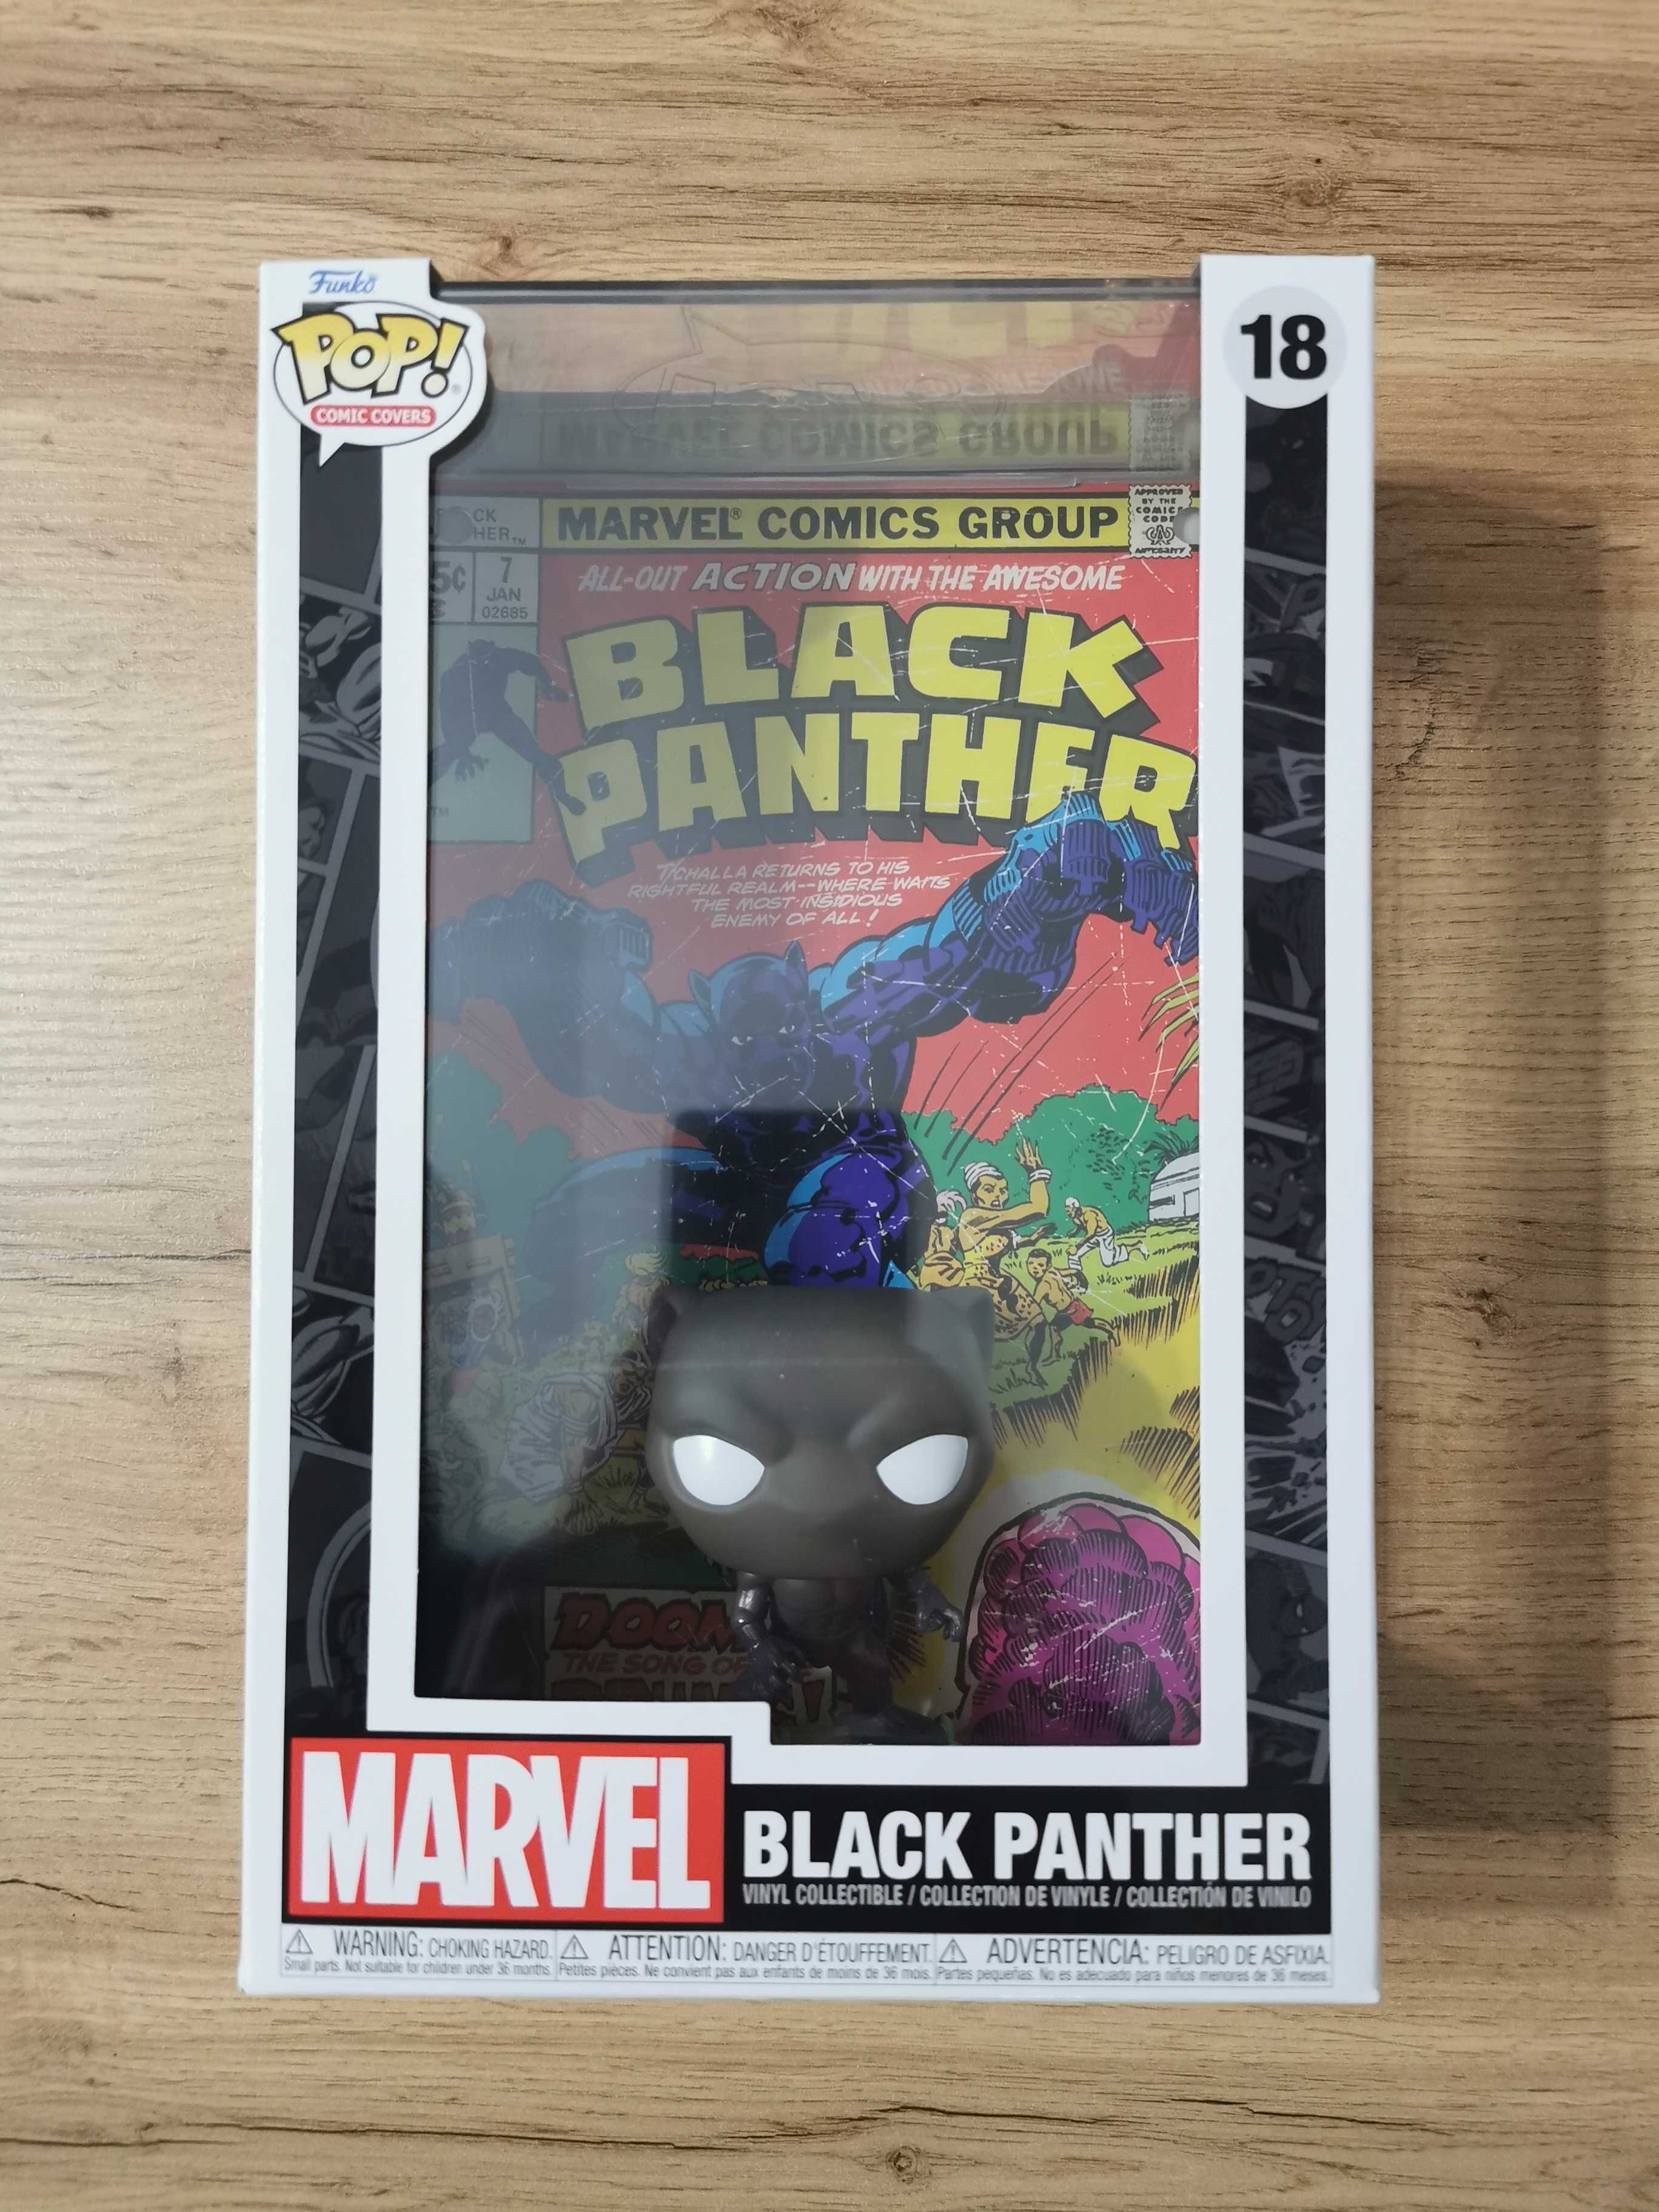 Black Panther 18 Comic Cover Funko Pop Marvel